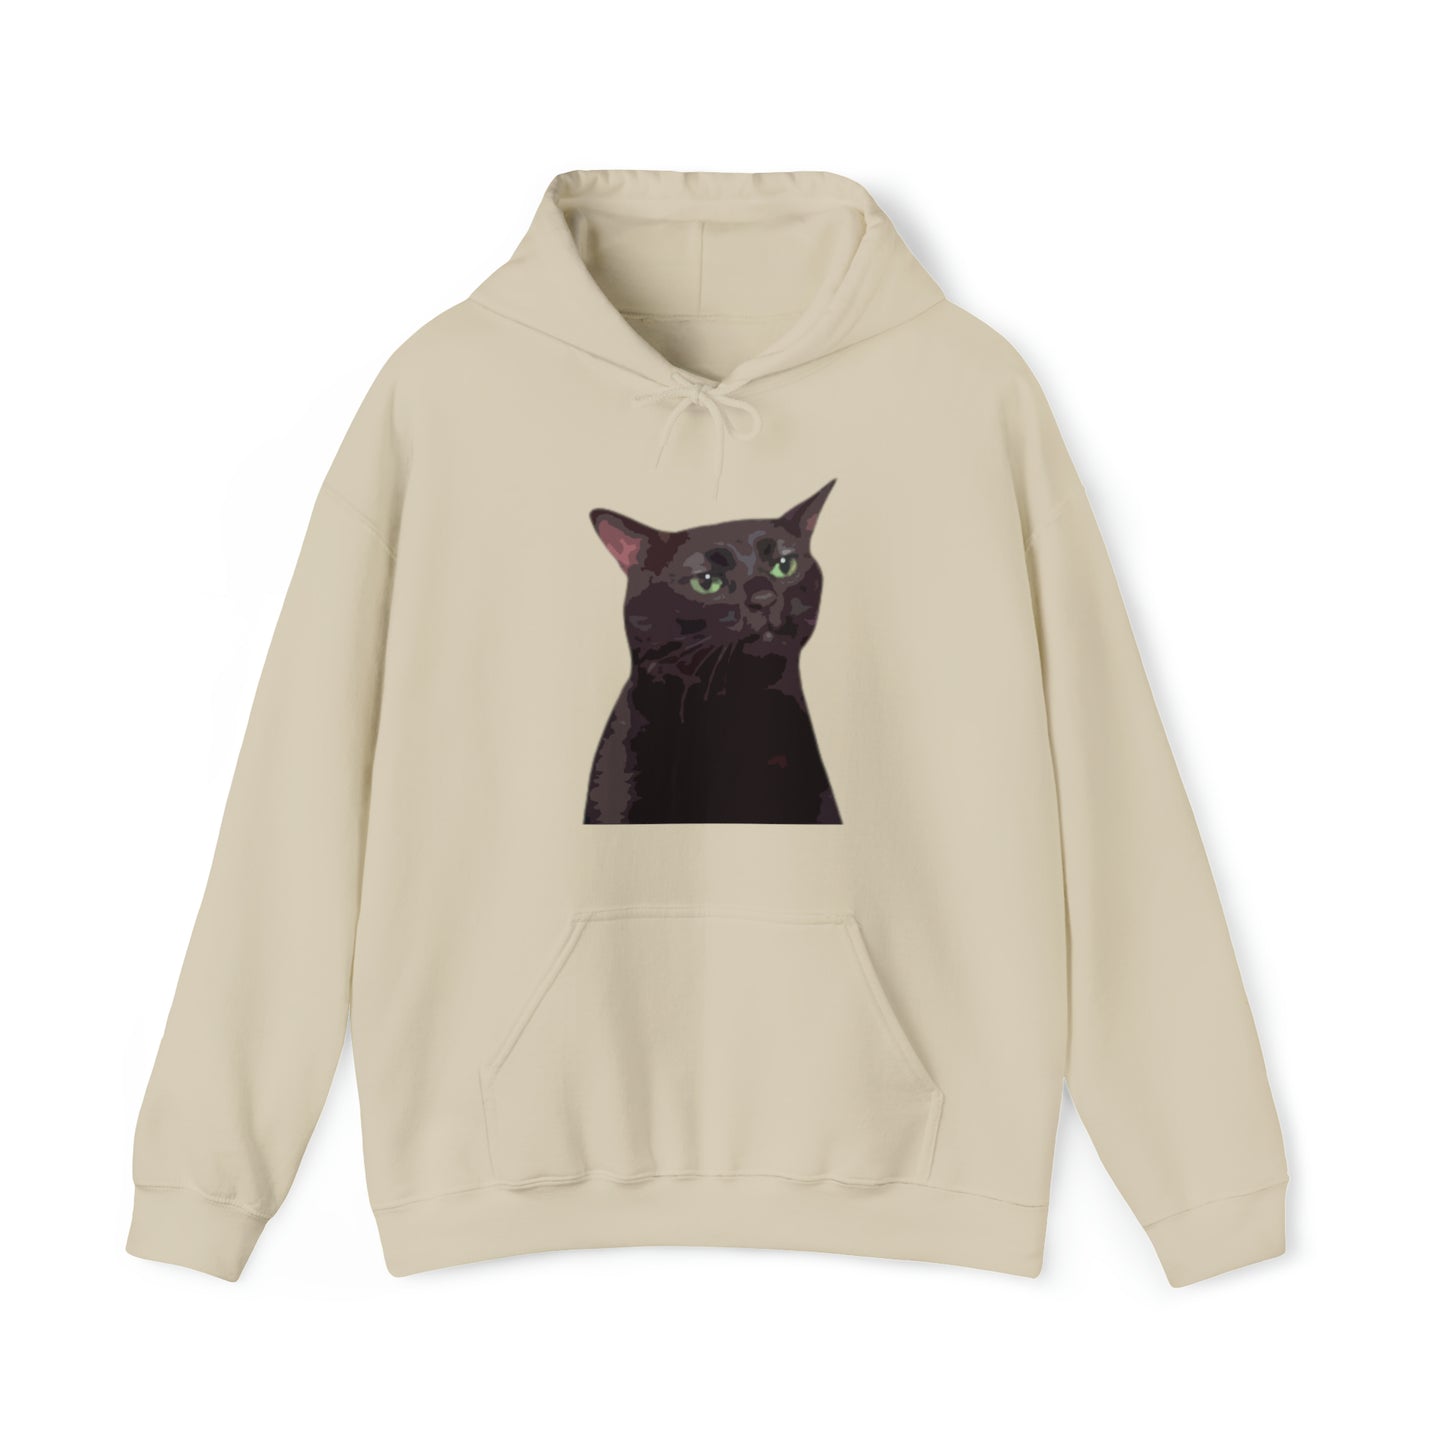 S Sand Black Cat Zoning Out Hoodie from HoodySZN.com